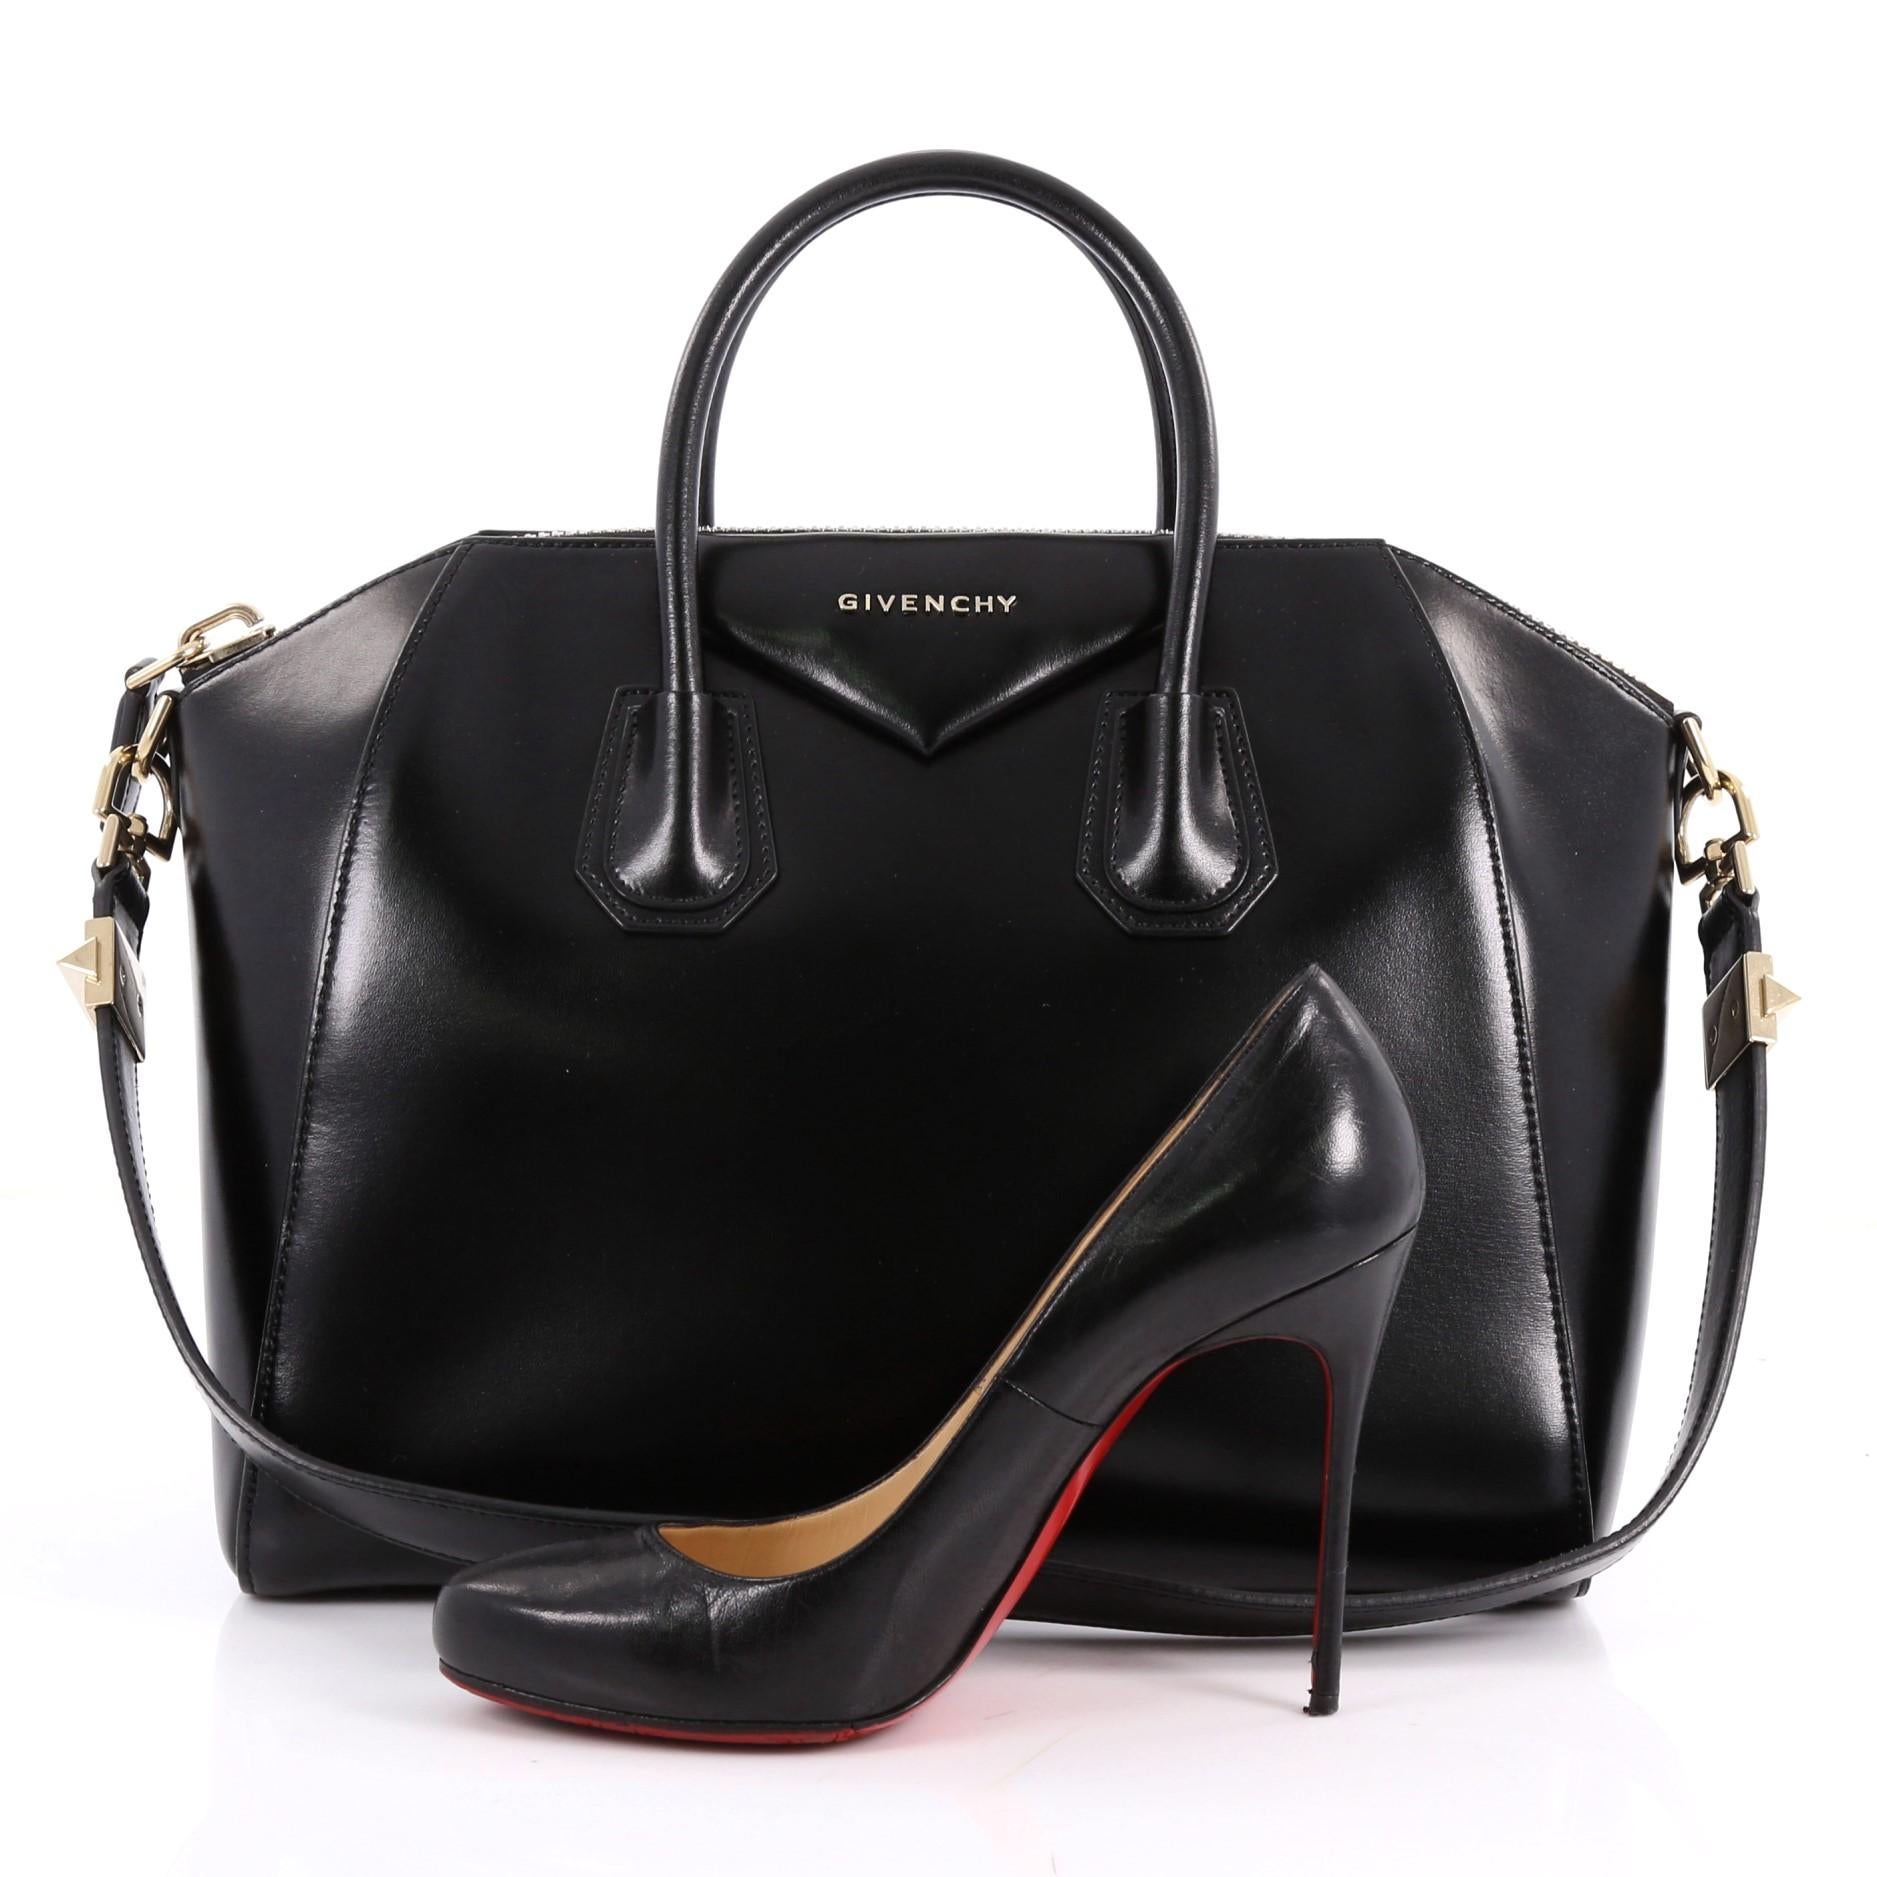 This authentic Givenchy Antigona Bag Glazed Leather Medium combines style and functionality all-in-one. Crafted from sleek black glazed leather, this structured handle bag features a dual-rolled leather handle, the brand's signature envelope flap